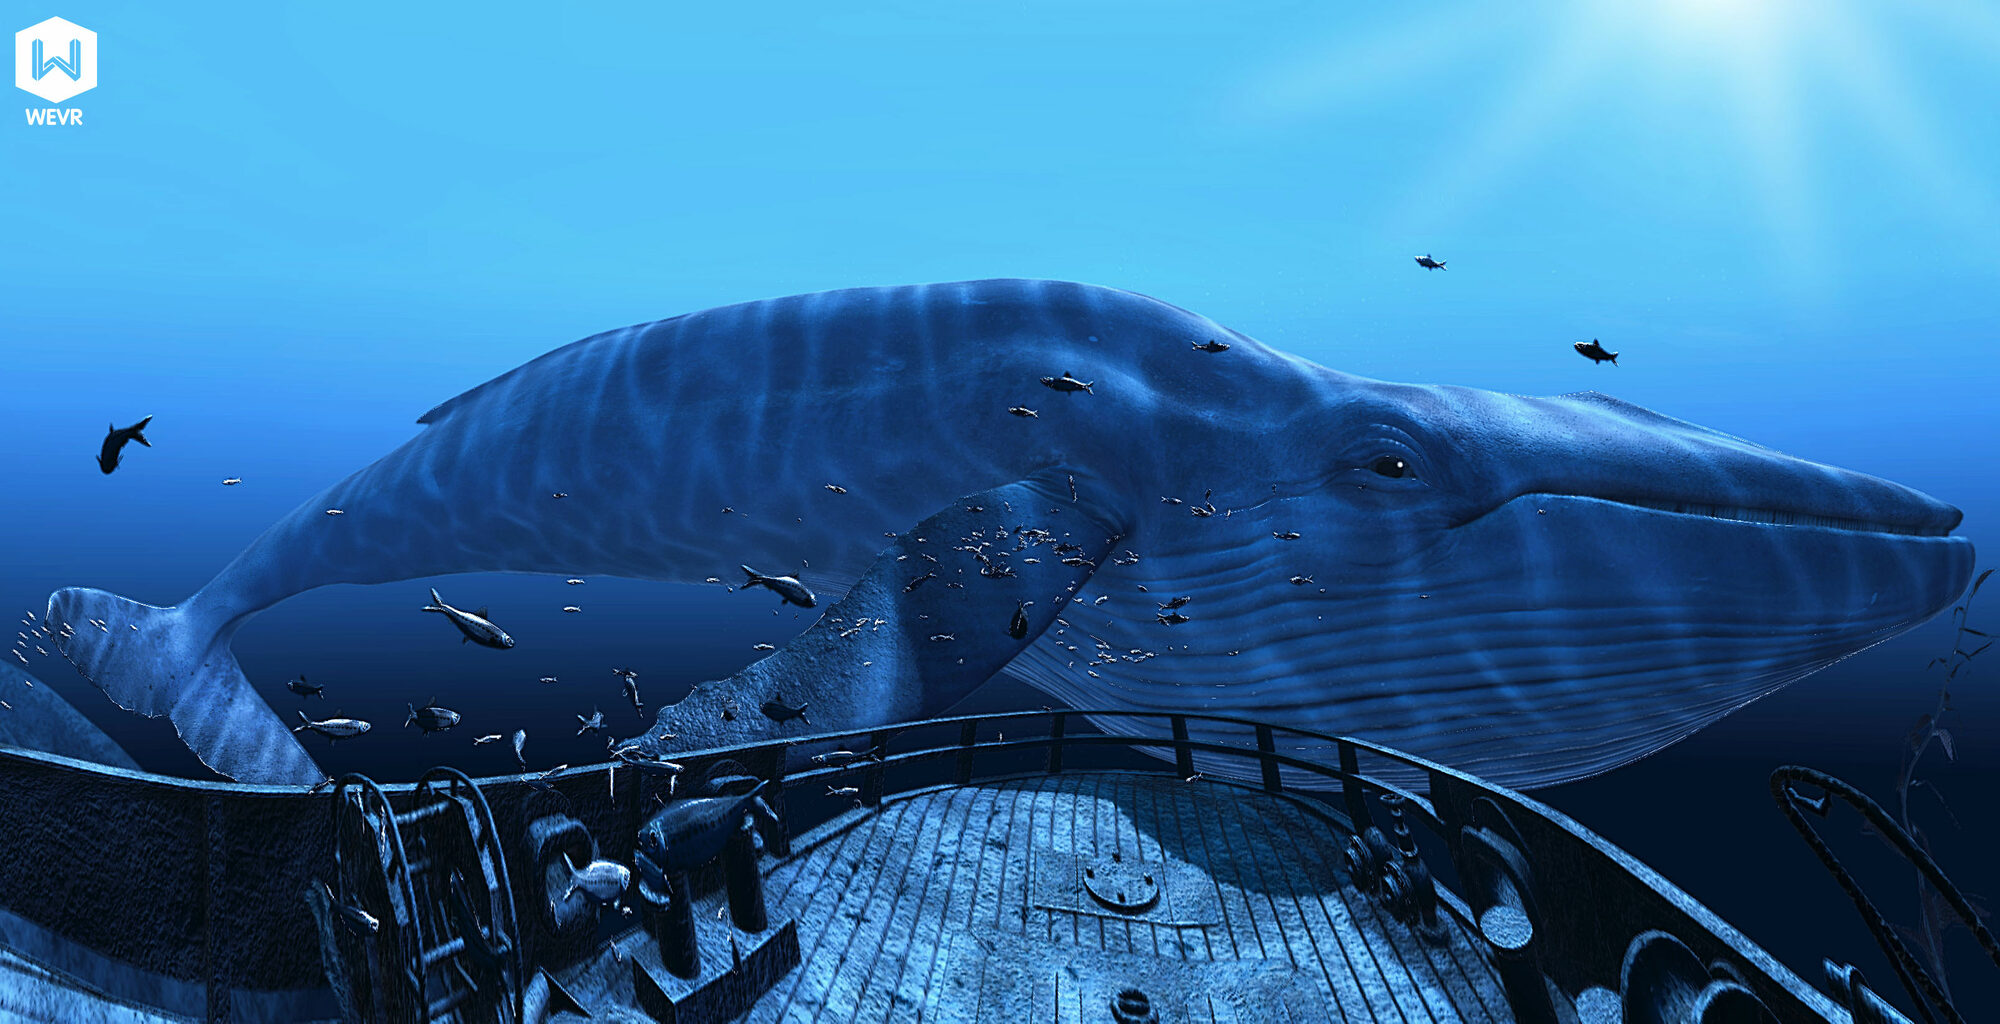 Screen capture of an under the ocean HTC Vive VR demo game which shows a shipwreck and a big blue whale. 